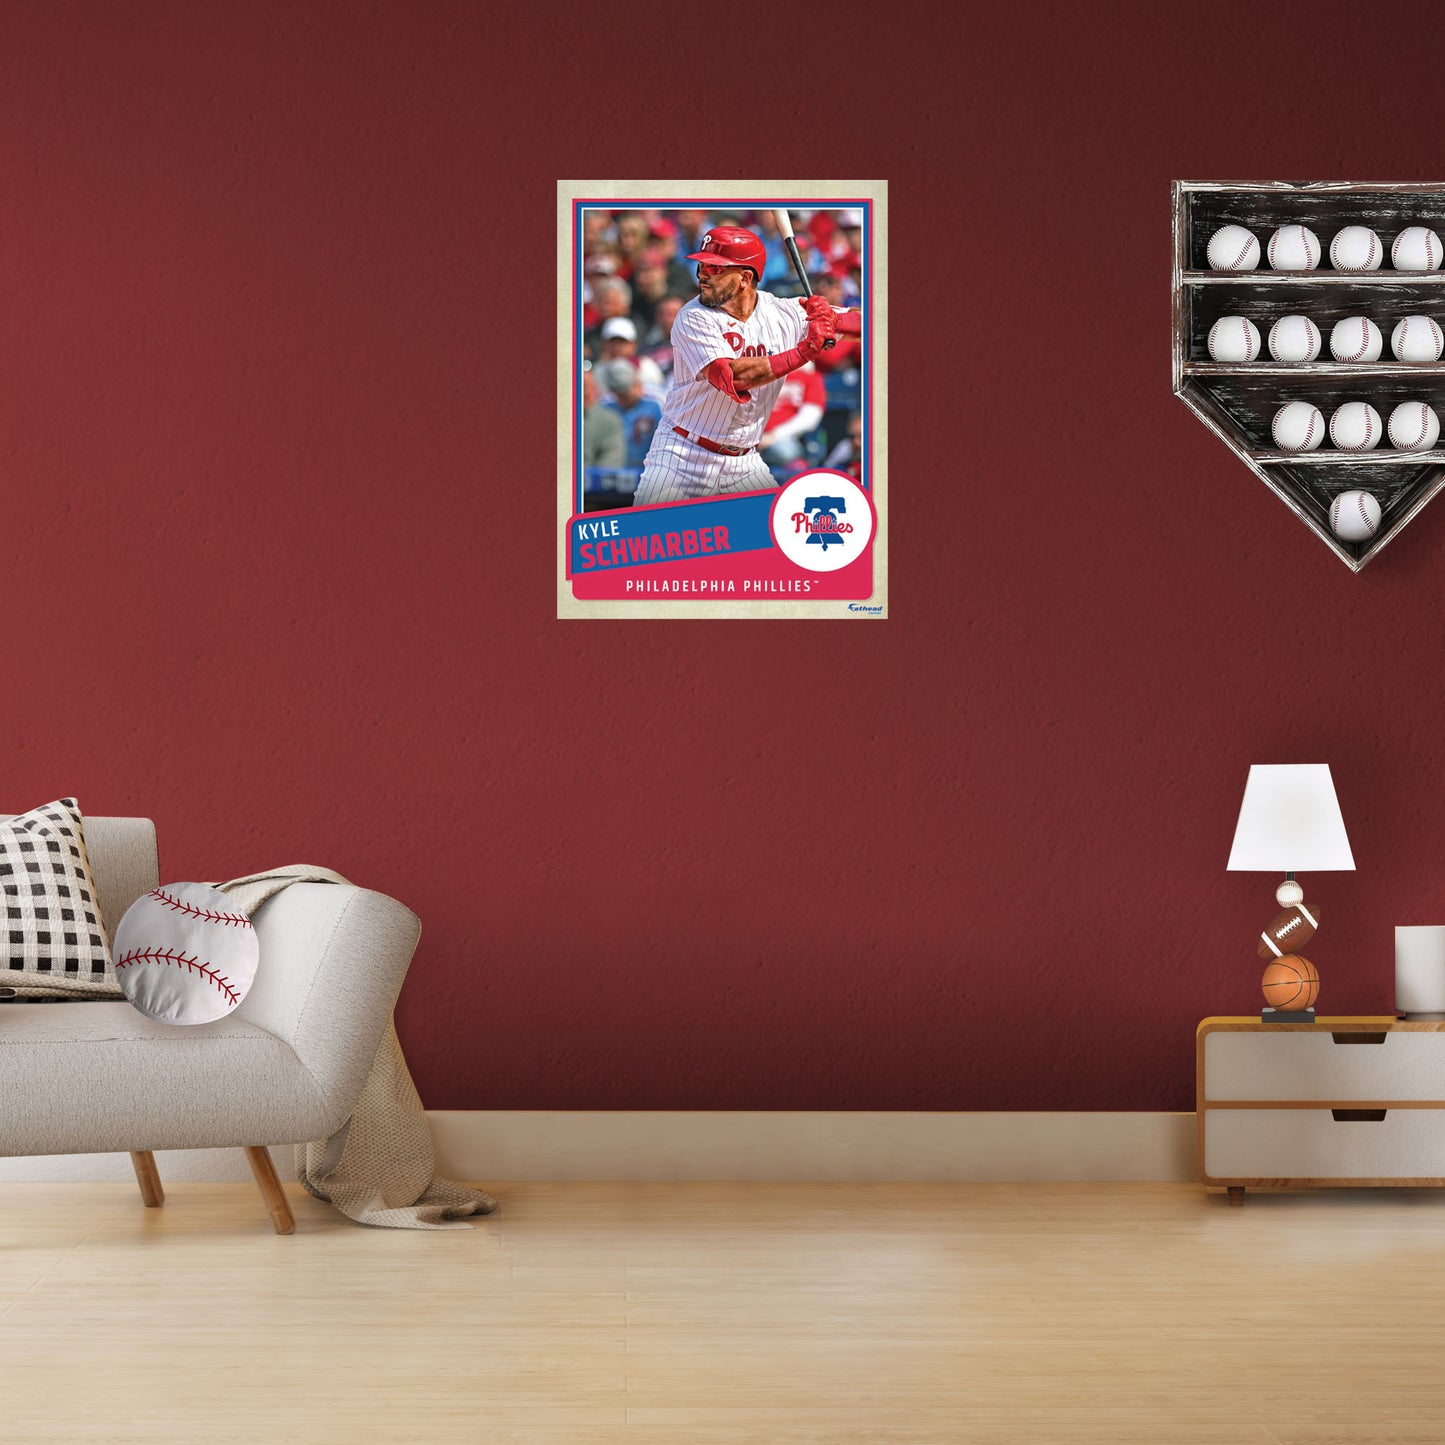 Philadelphia Phillies: Kyle Schwarber  Poster        - Officially Licensed MLB Removable     Adhesive Decal